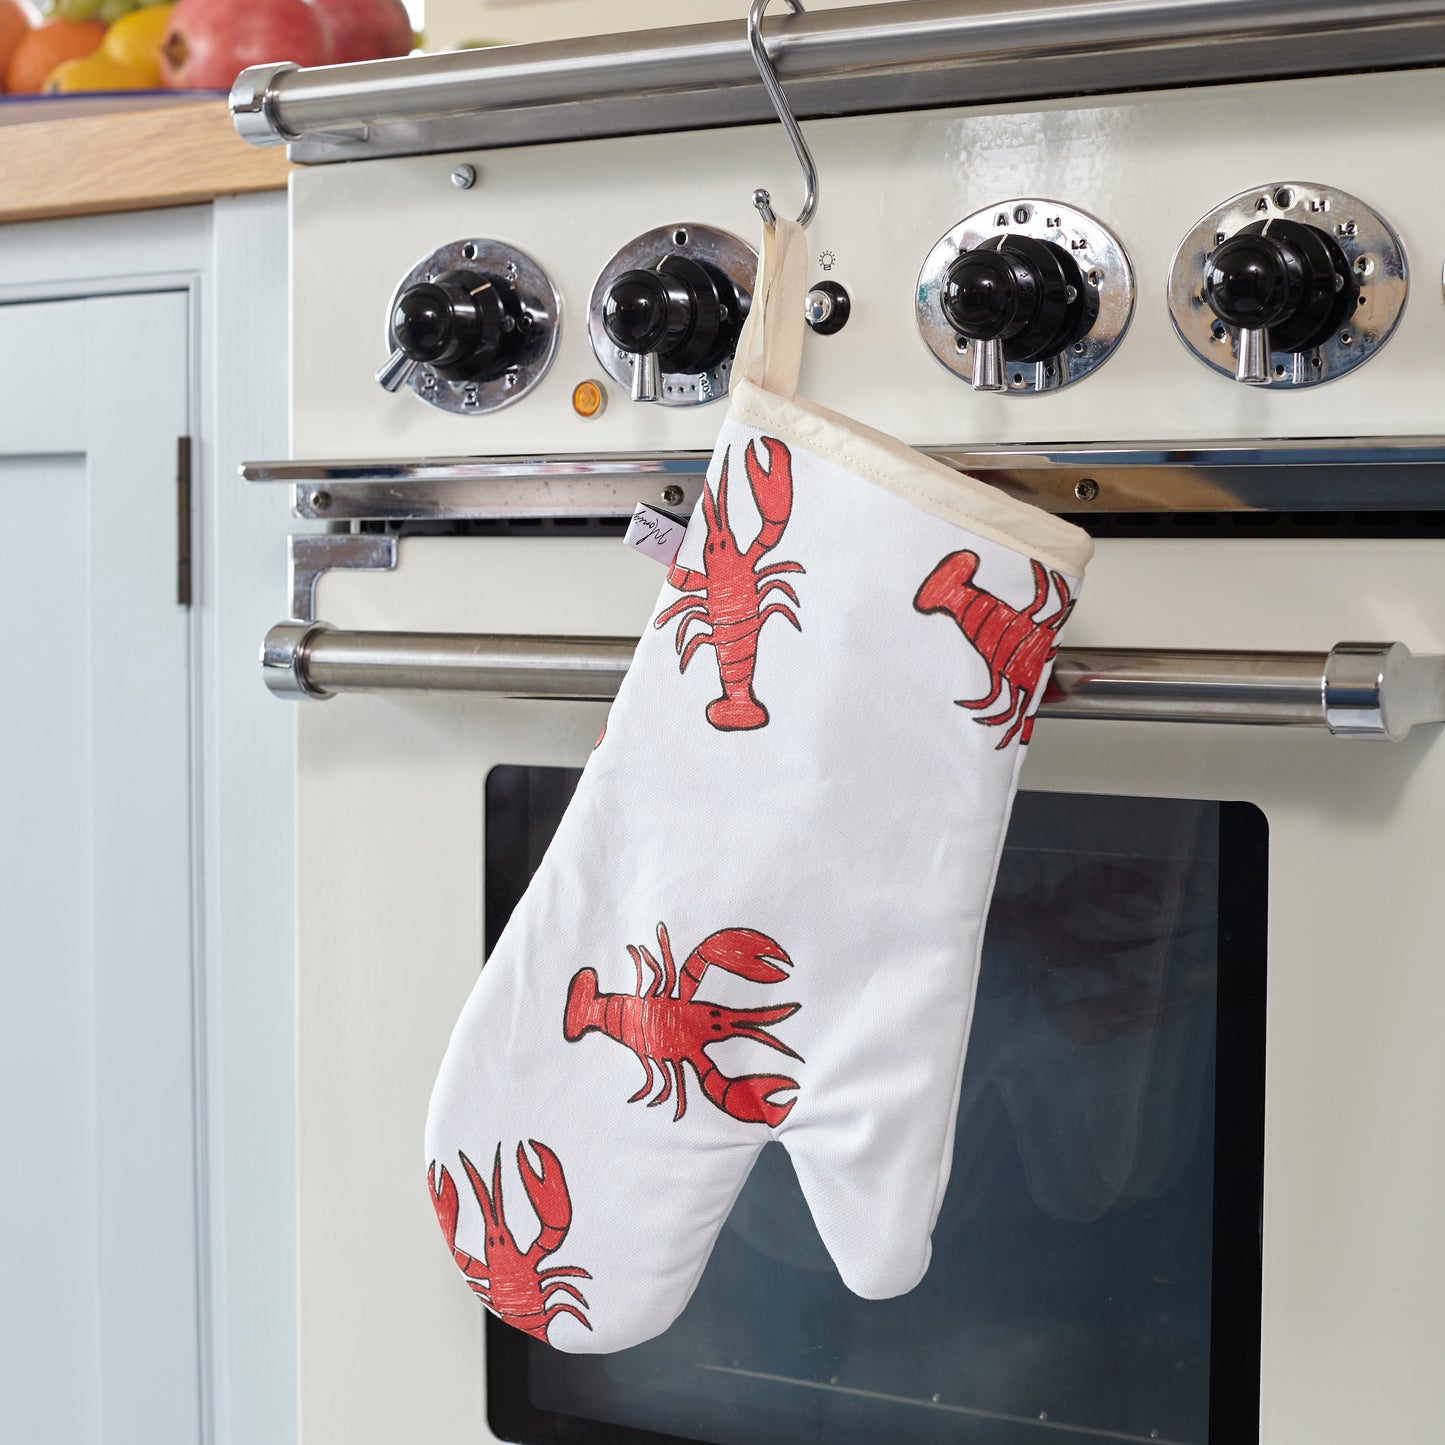 Lobster print oven glove - by the oven in the kitchen